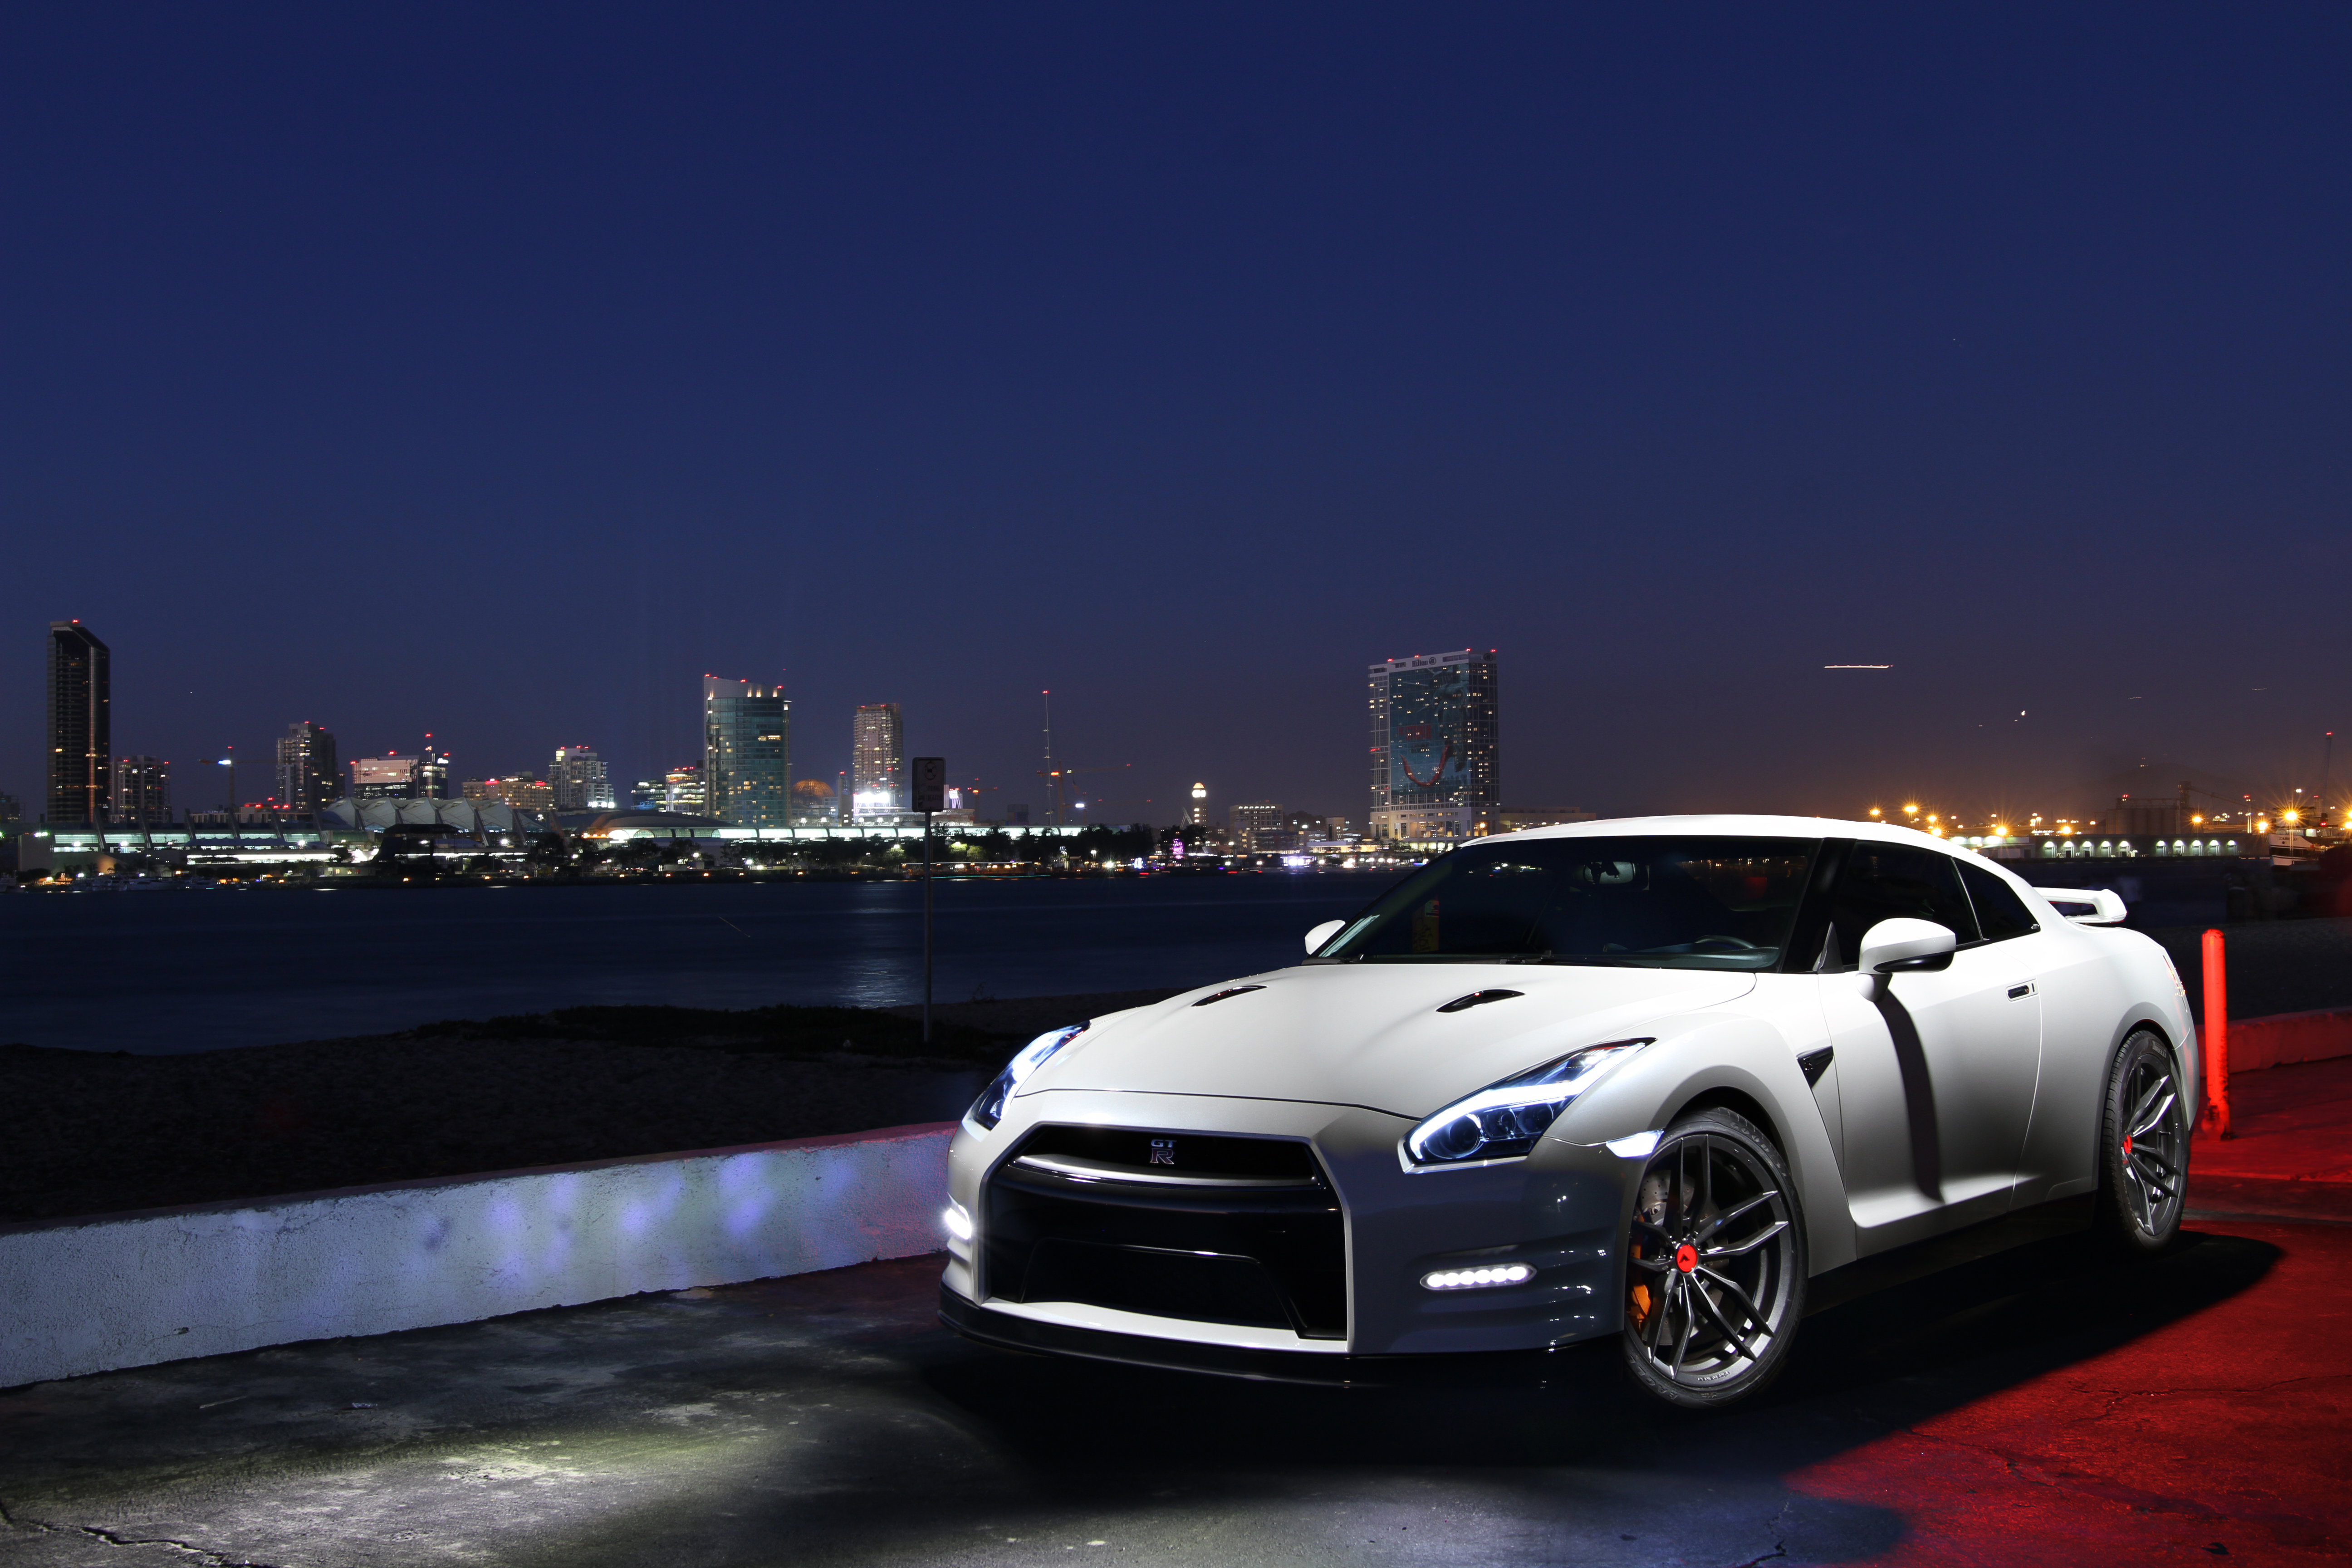 Nissan Skyline Gt R Wallpaper For Puters